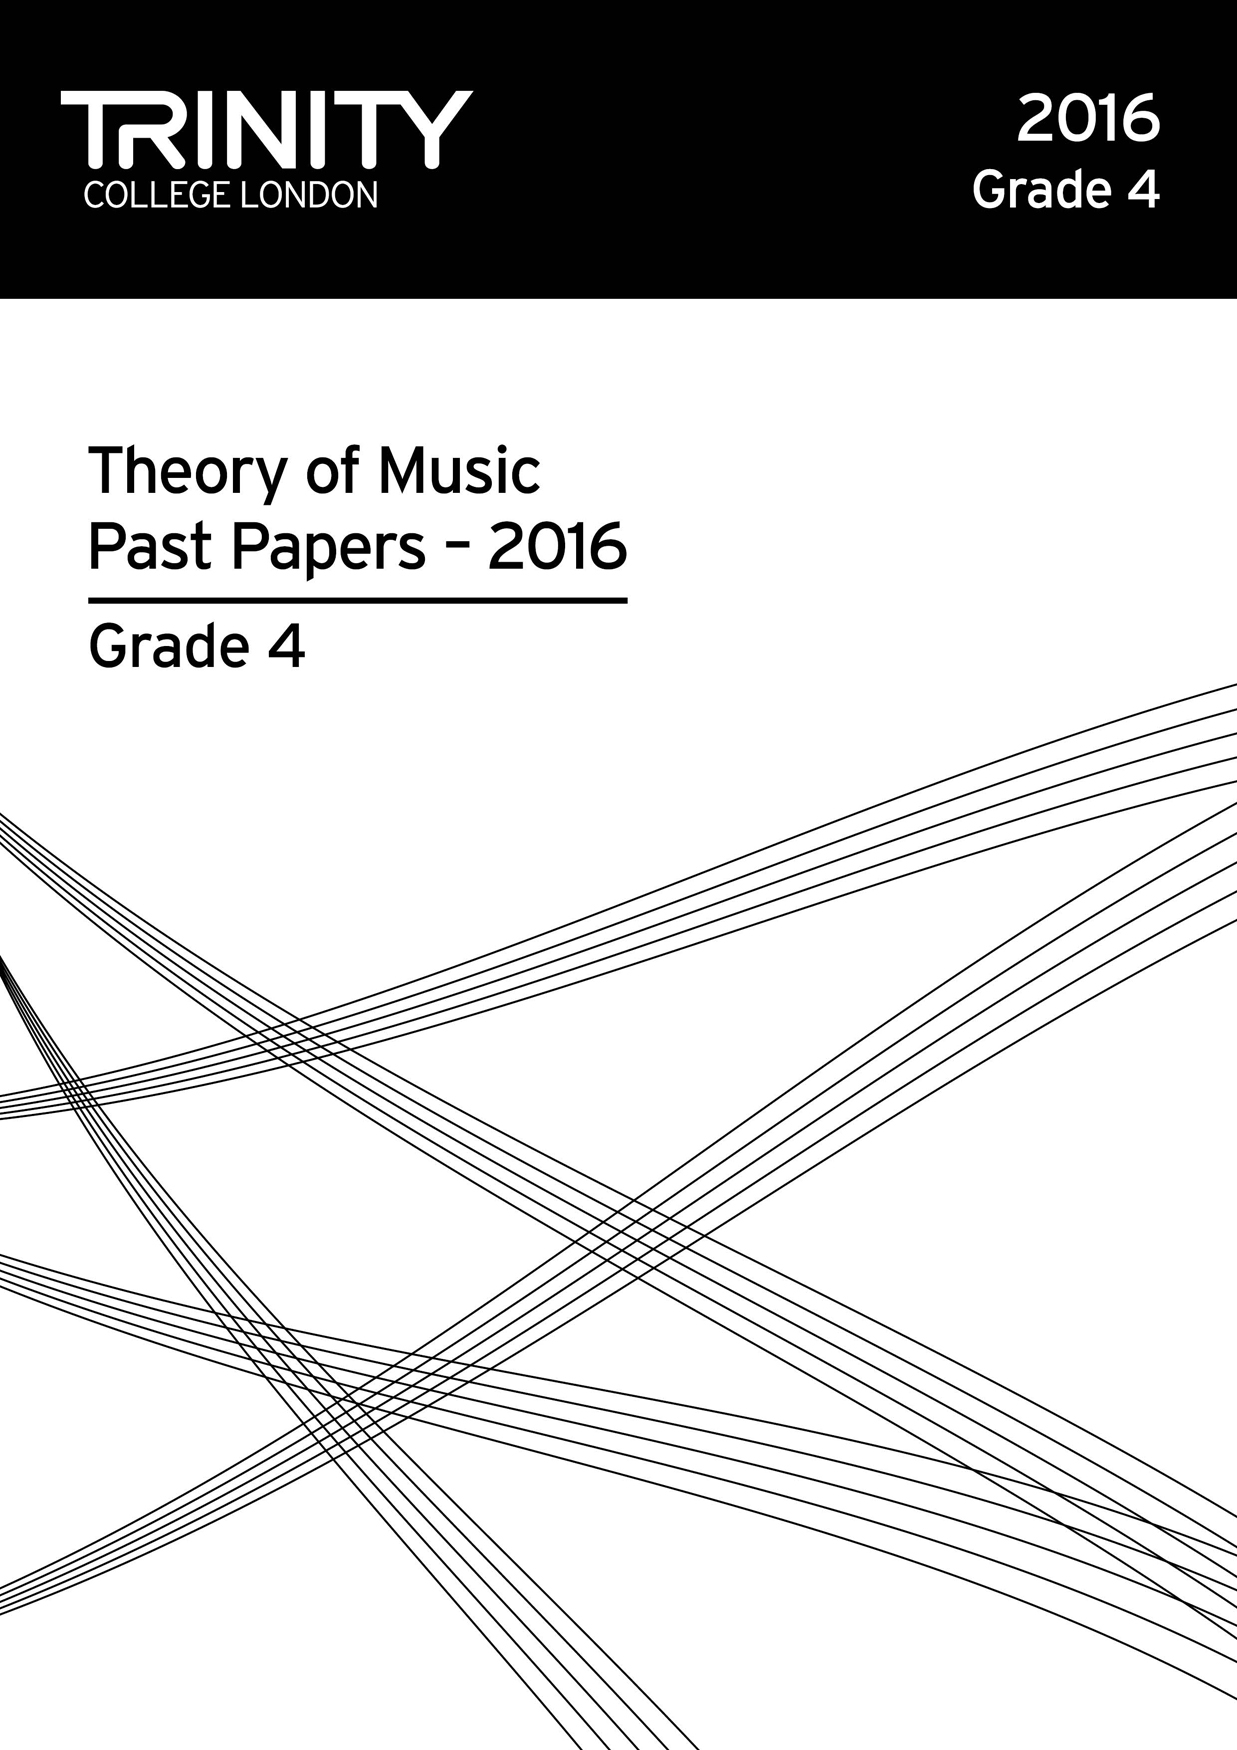 Trinity College London Theory of Music Past Paper 2016 - Grade 4 [Trinity Theory Past Papers]